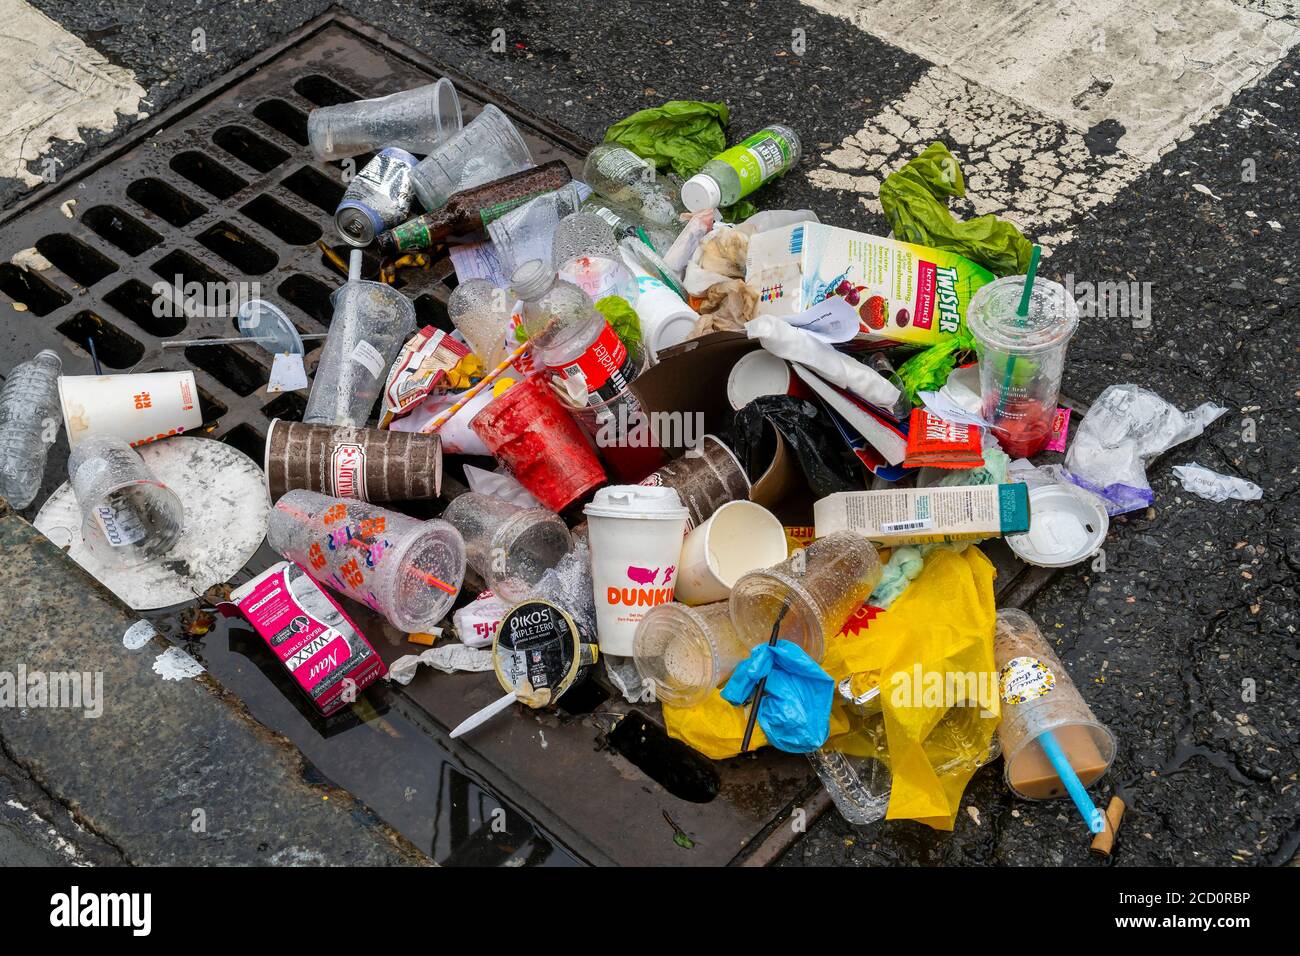 A clogged storm drain, filled with garbage, in the Chelsea neighborhood of New York on Sunday, August 16, 2020. (© Richard b. Levine) Stock Photo